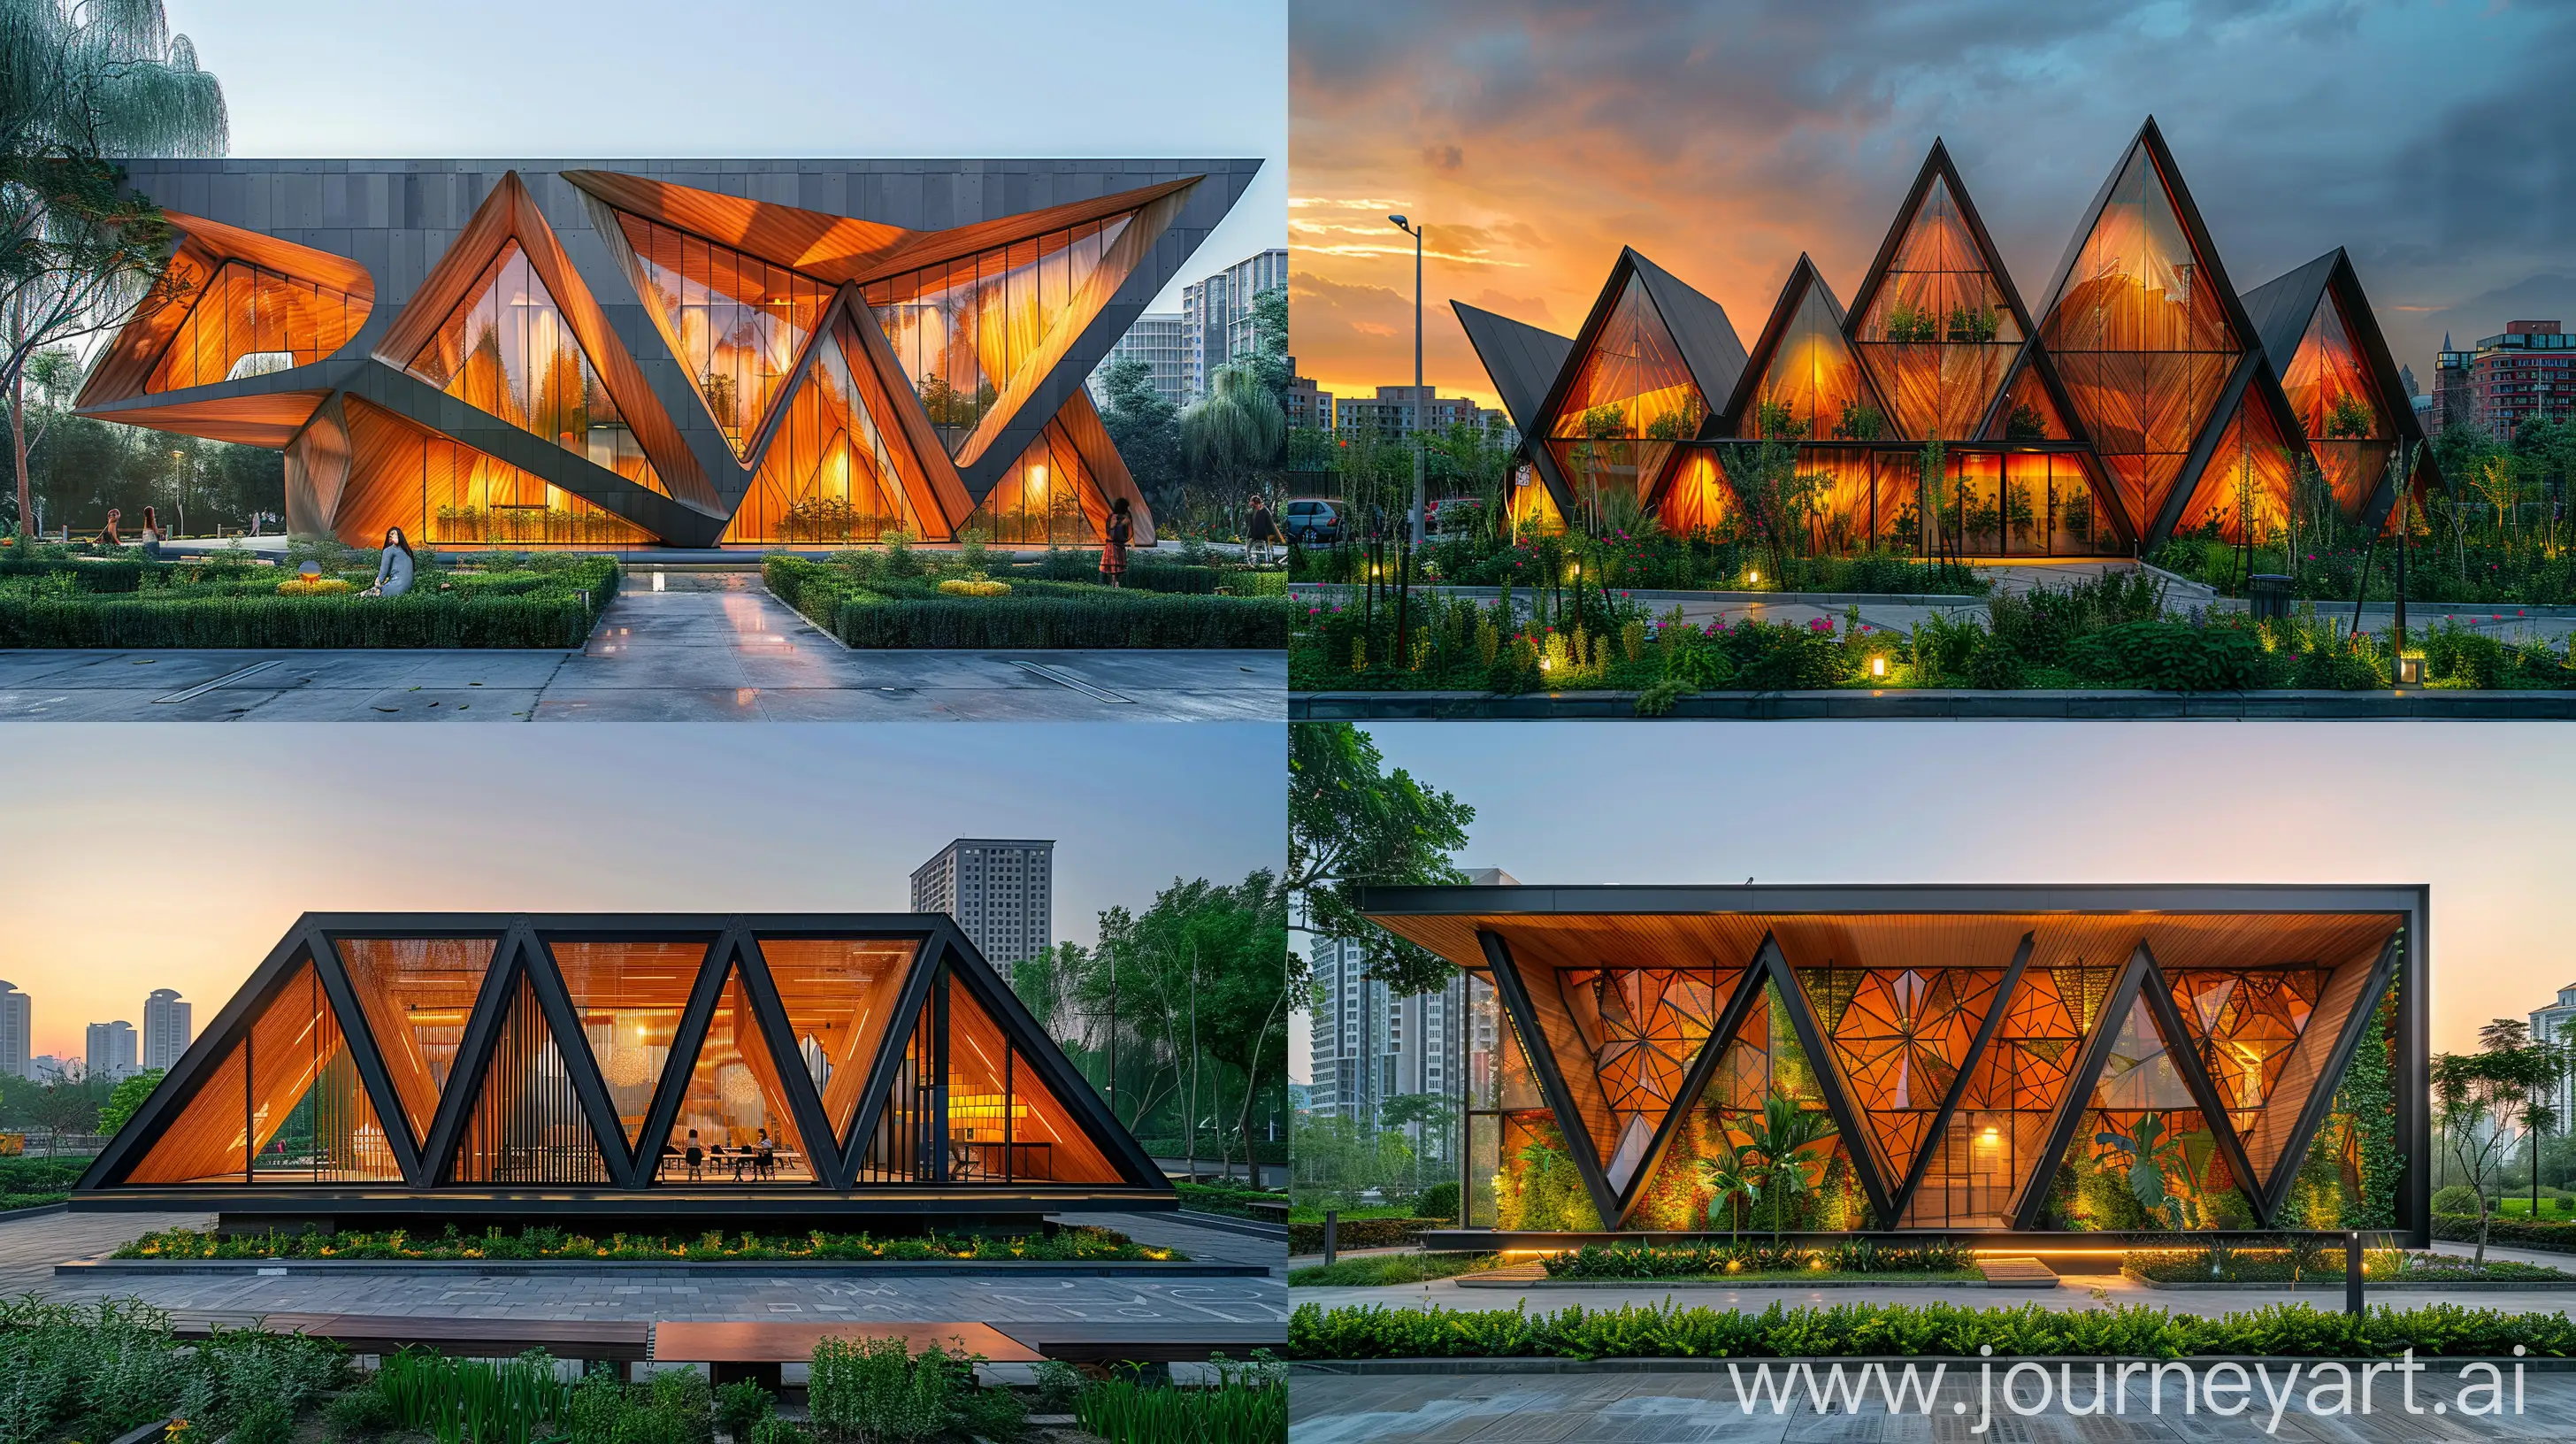 Urban-Oasis-Contemporary-Student-Pavilion-with-Kinetic-Wooden-Facade-at-Sunset